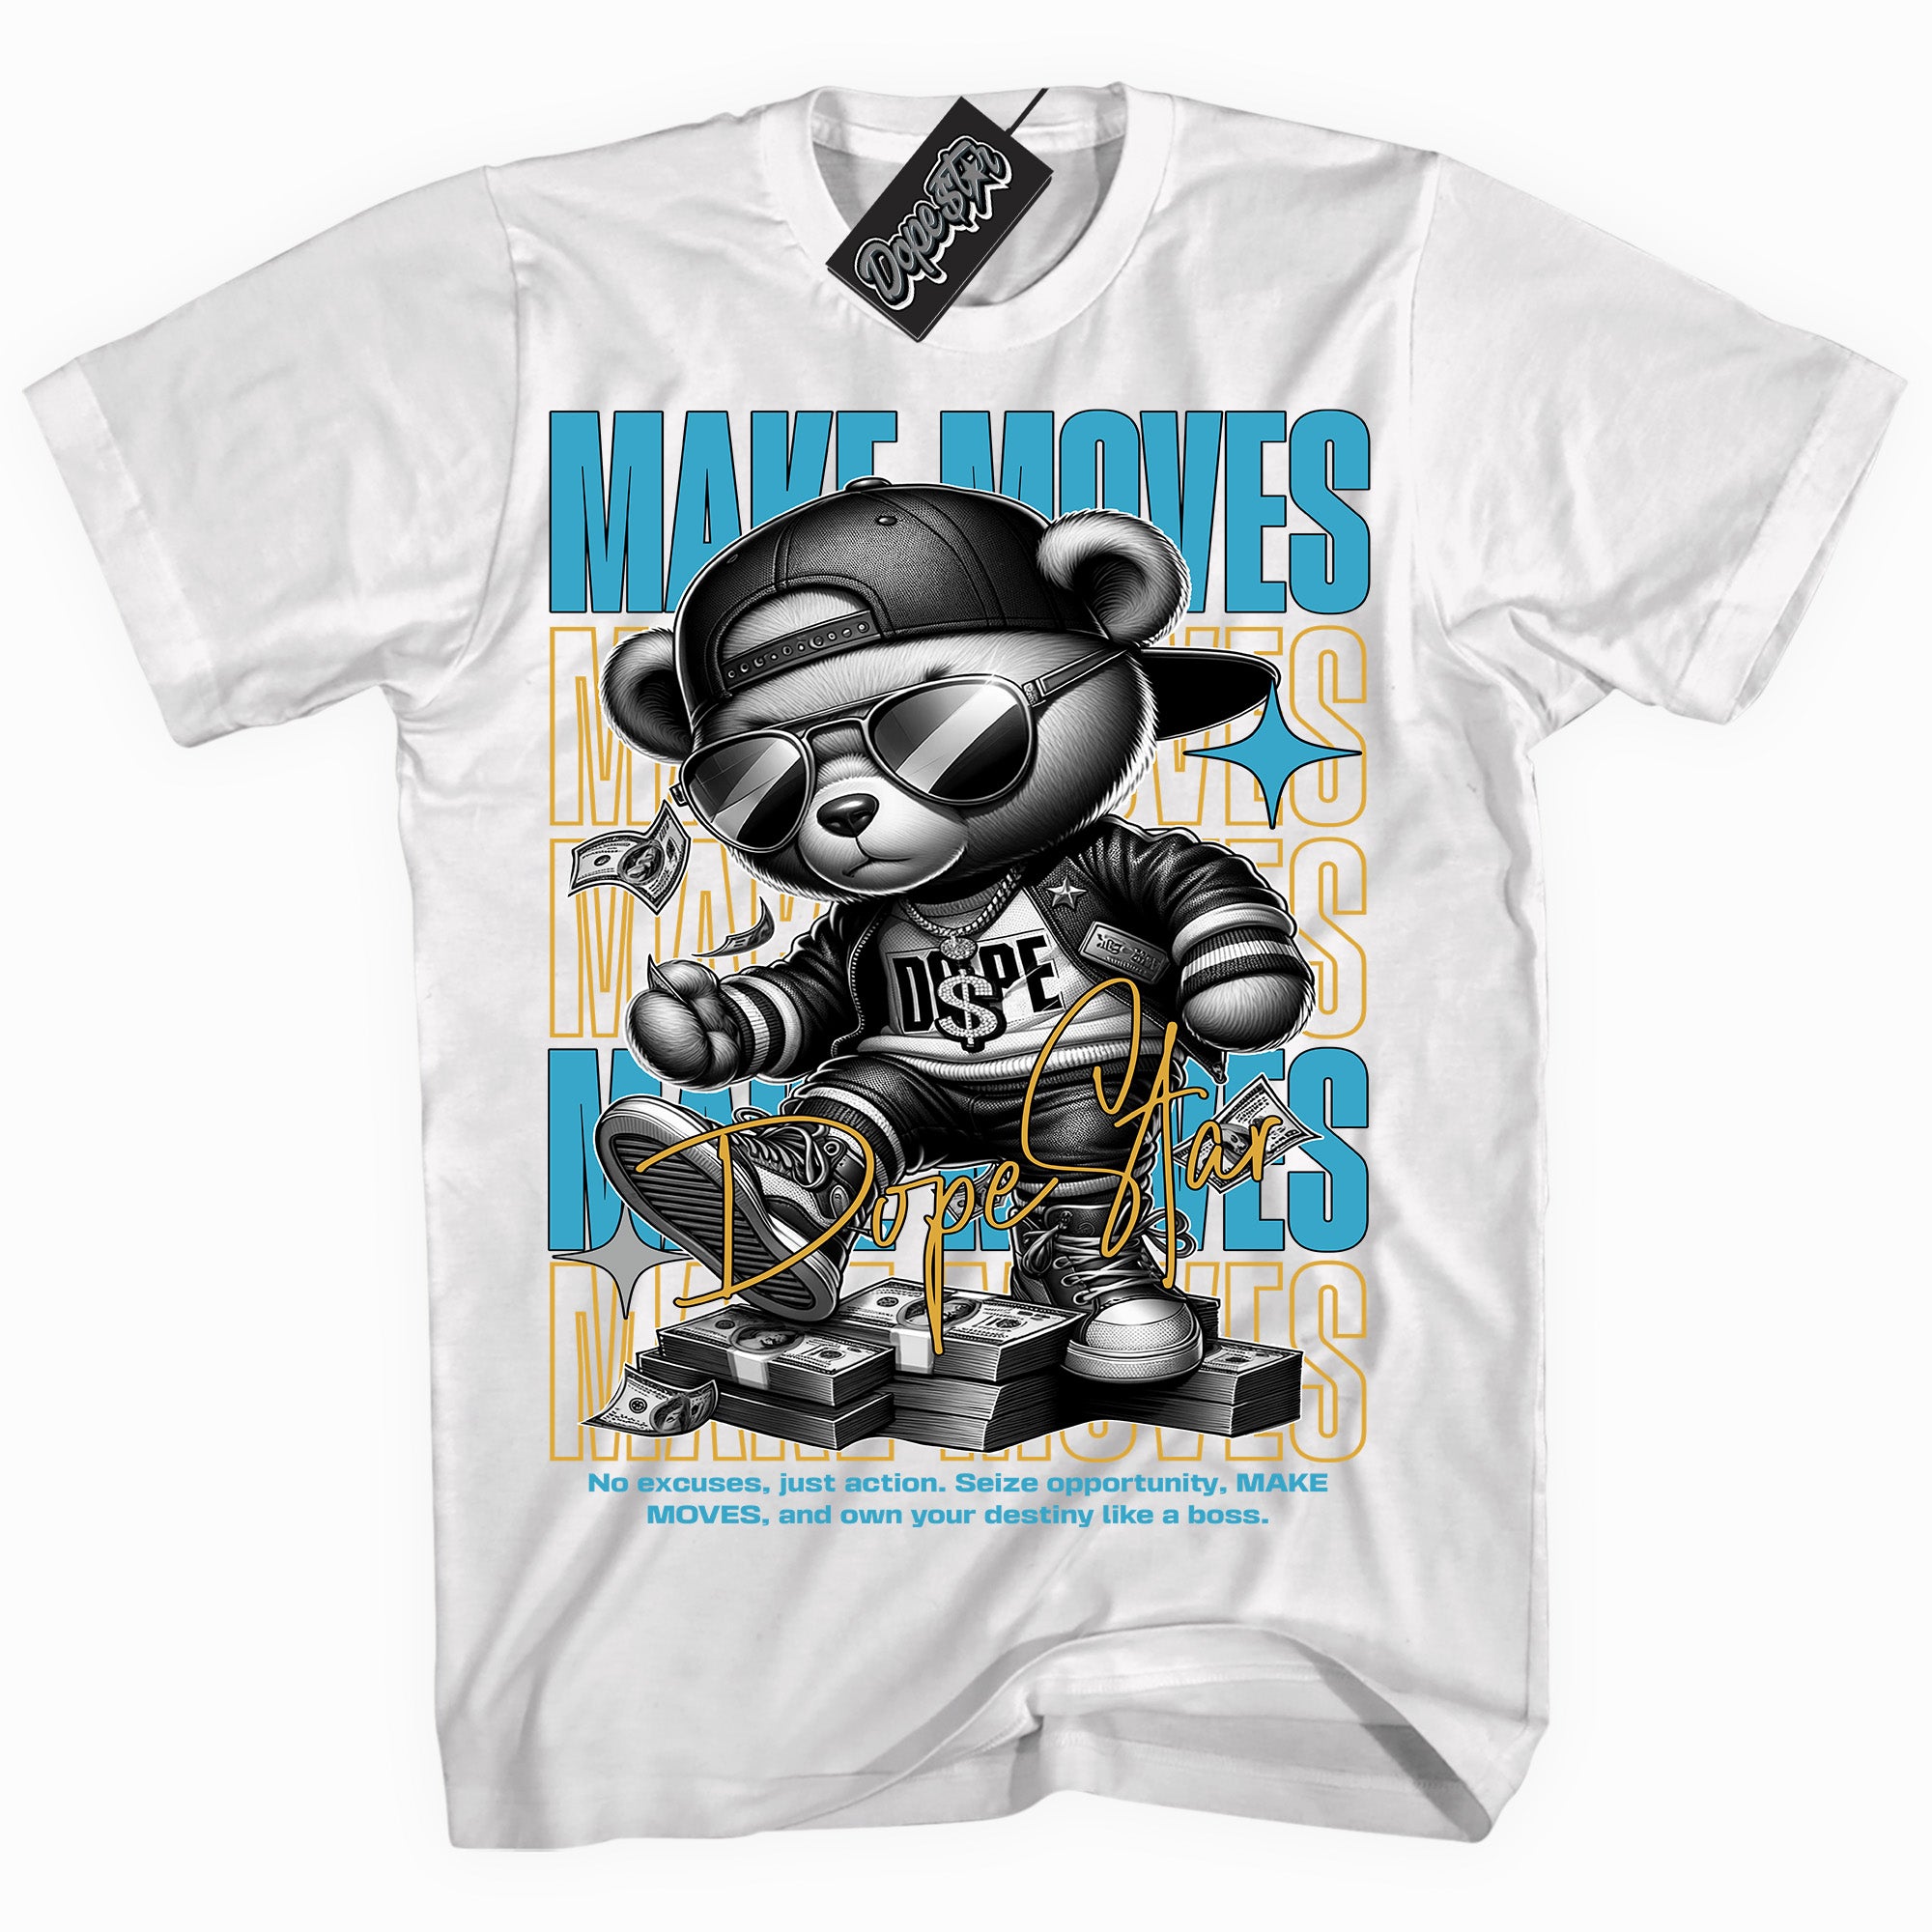 Cool White graphic tee with “ Makin Moves ” print, that perfectly matches AQUA 5s sneakers 